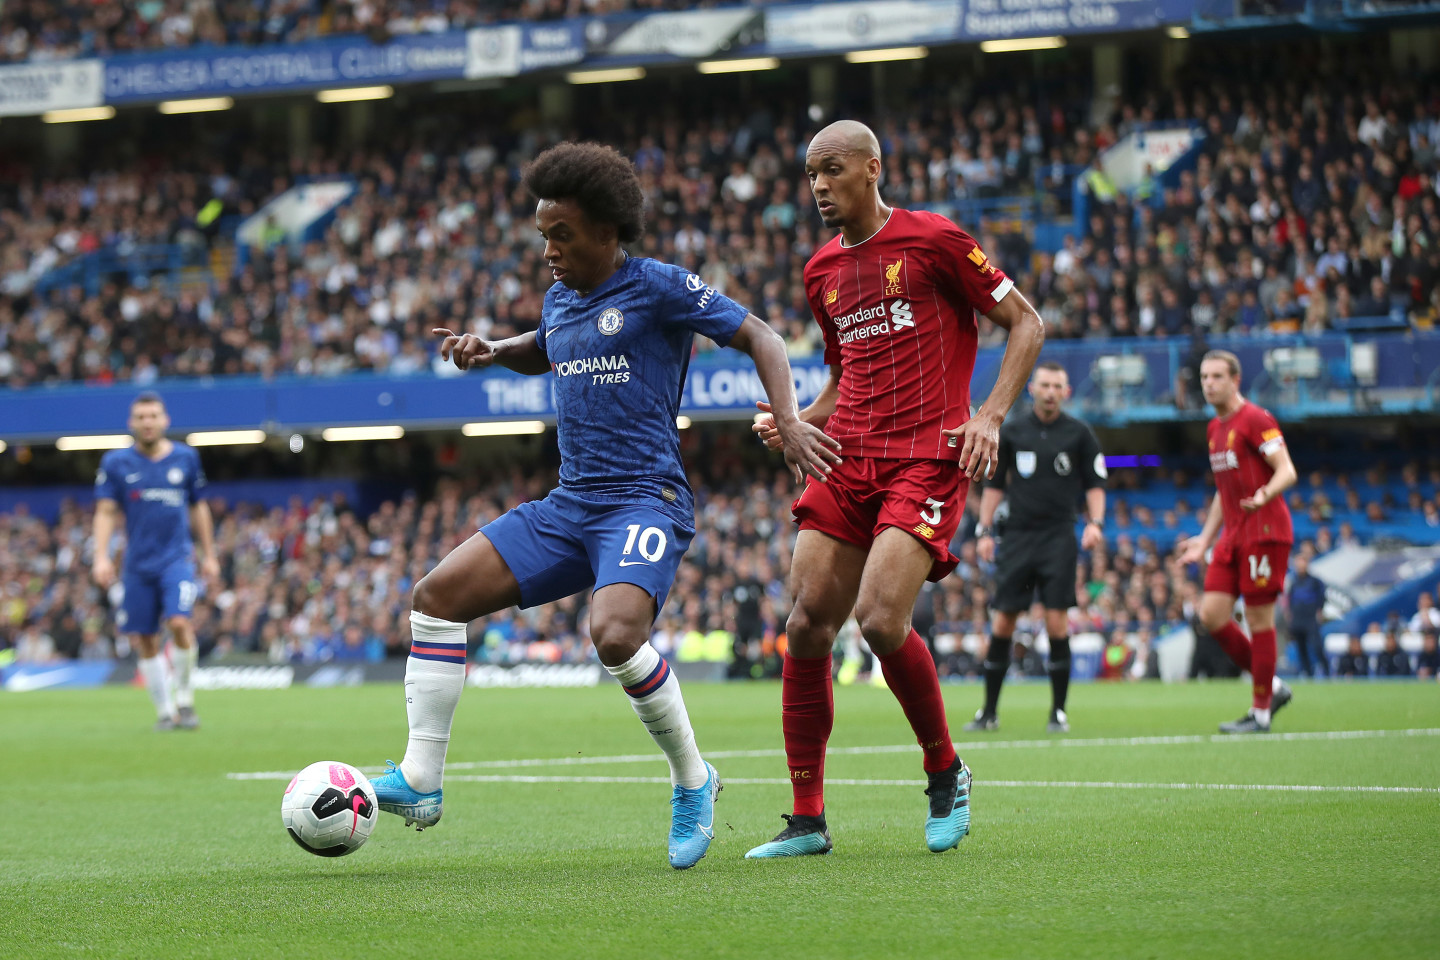 Chelsea vs Liverpool preview, kick-off time, team news and how to watch live stream News Official Site Chelsea Football Club